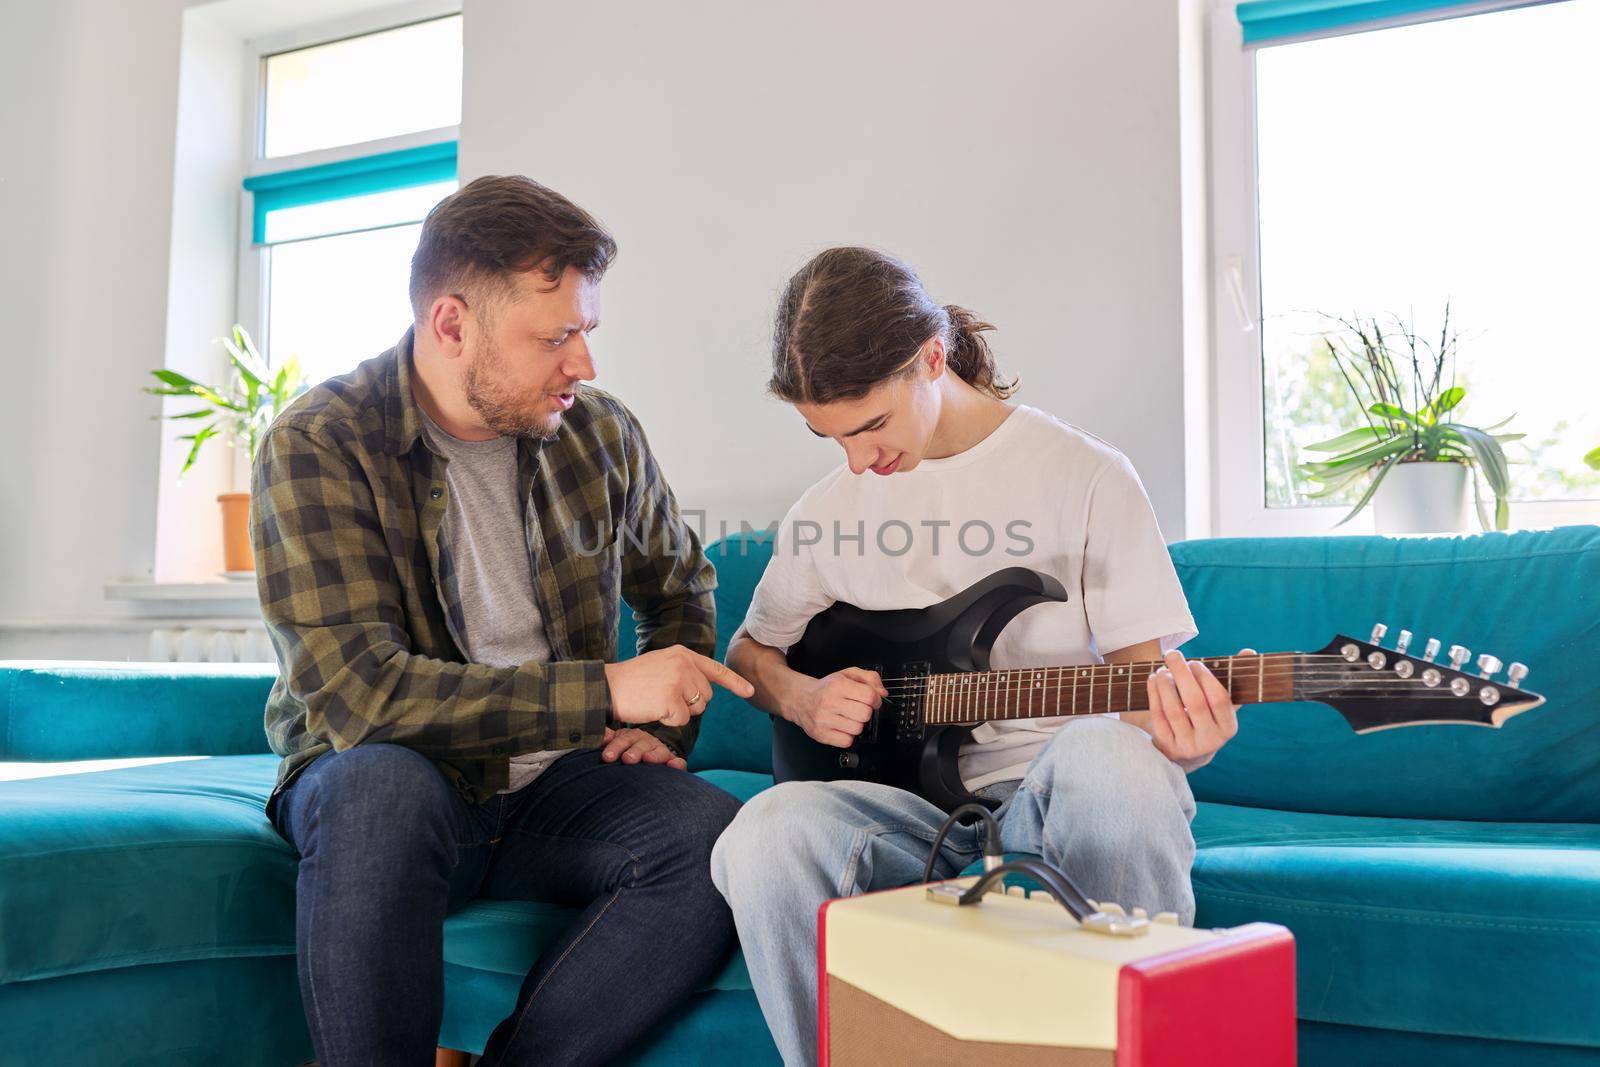 Father teaches his teenage son to play the electric guitar. Family sitting together at home in living room on couch. Parent-child relationship, lifestyle, creativity, music, teenagers concept